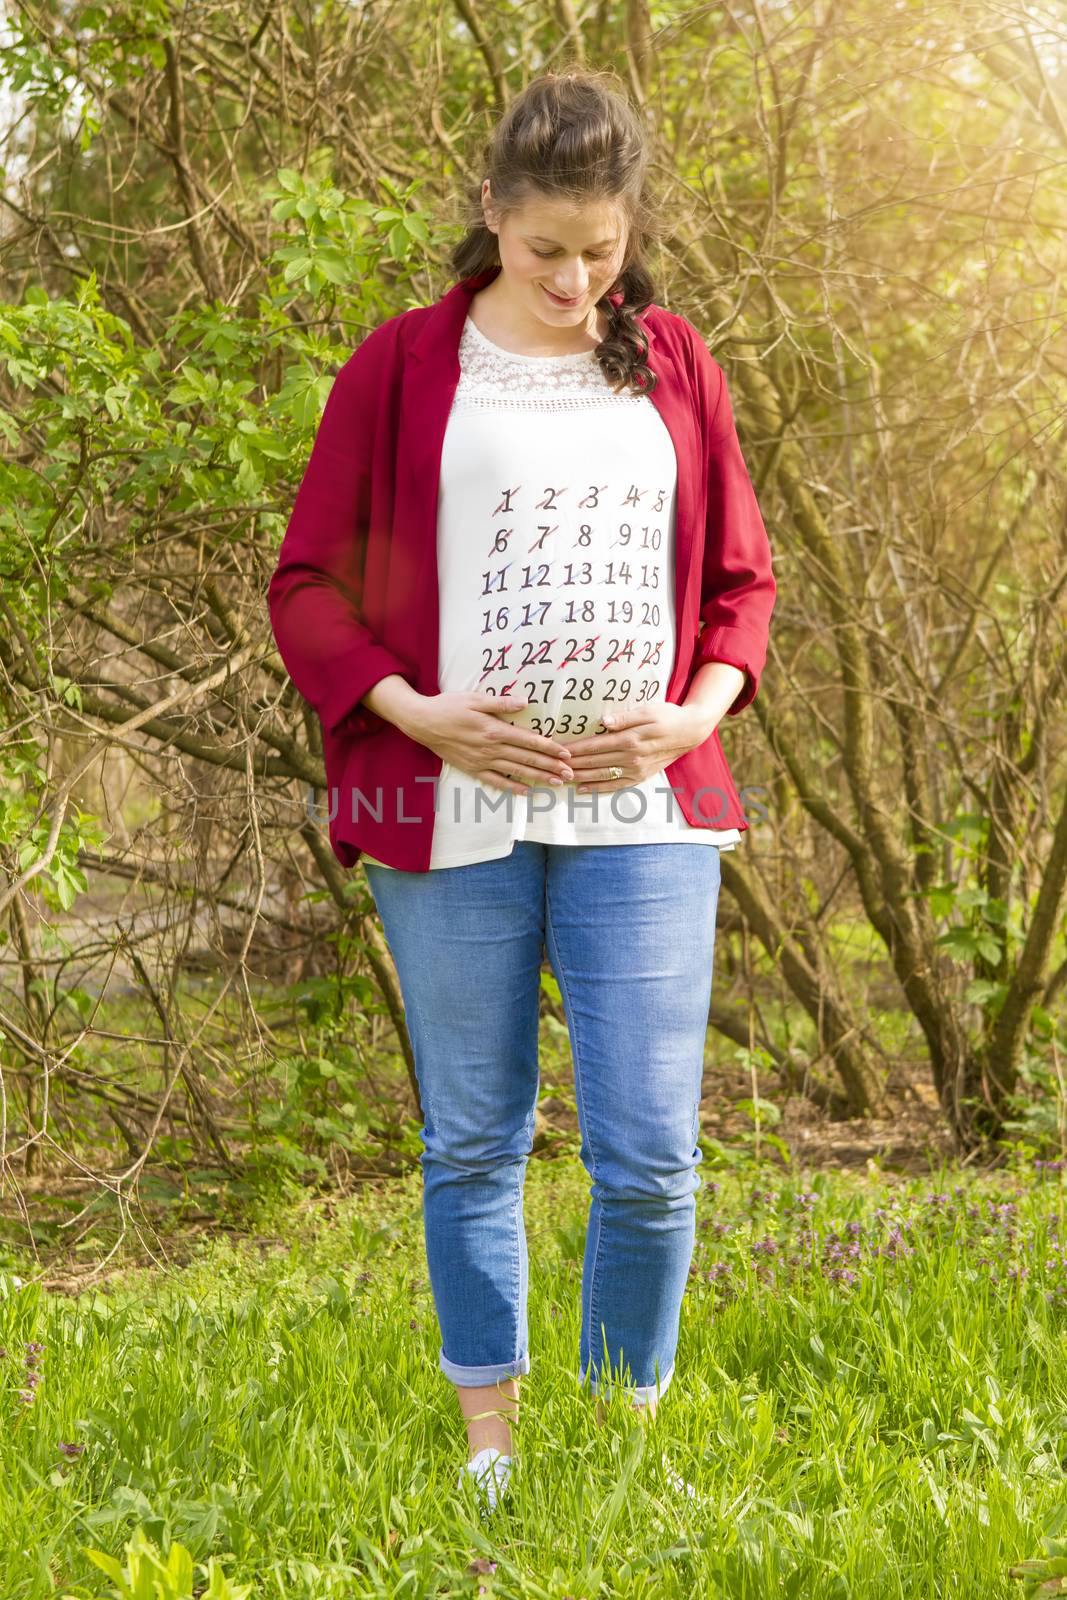 Pregnant woman in red jacket with calendar on her T-shirt outdoor in the park